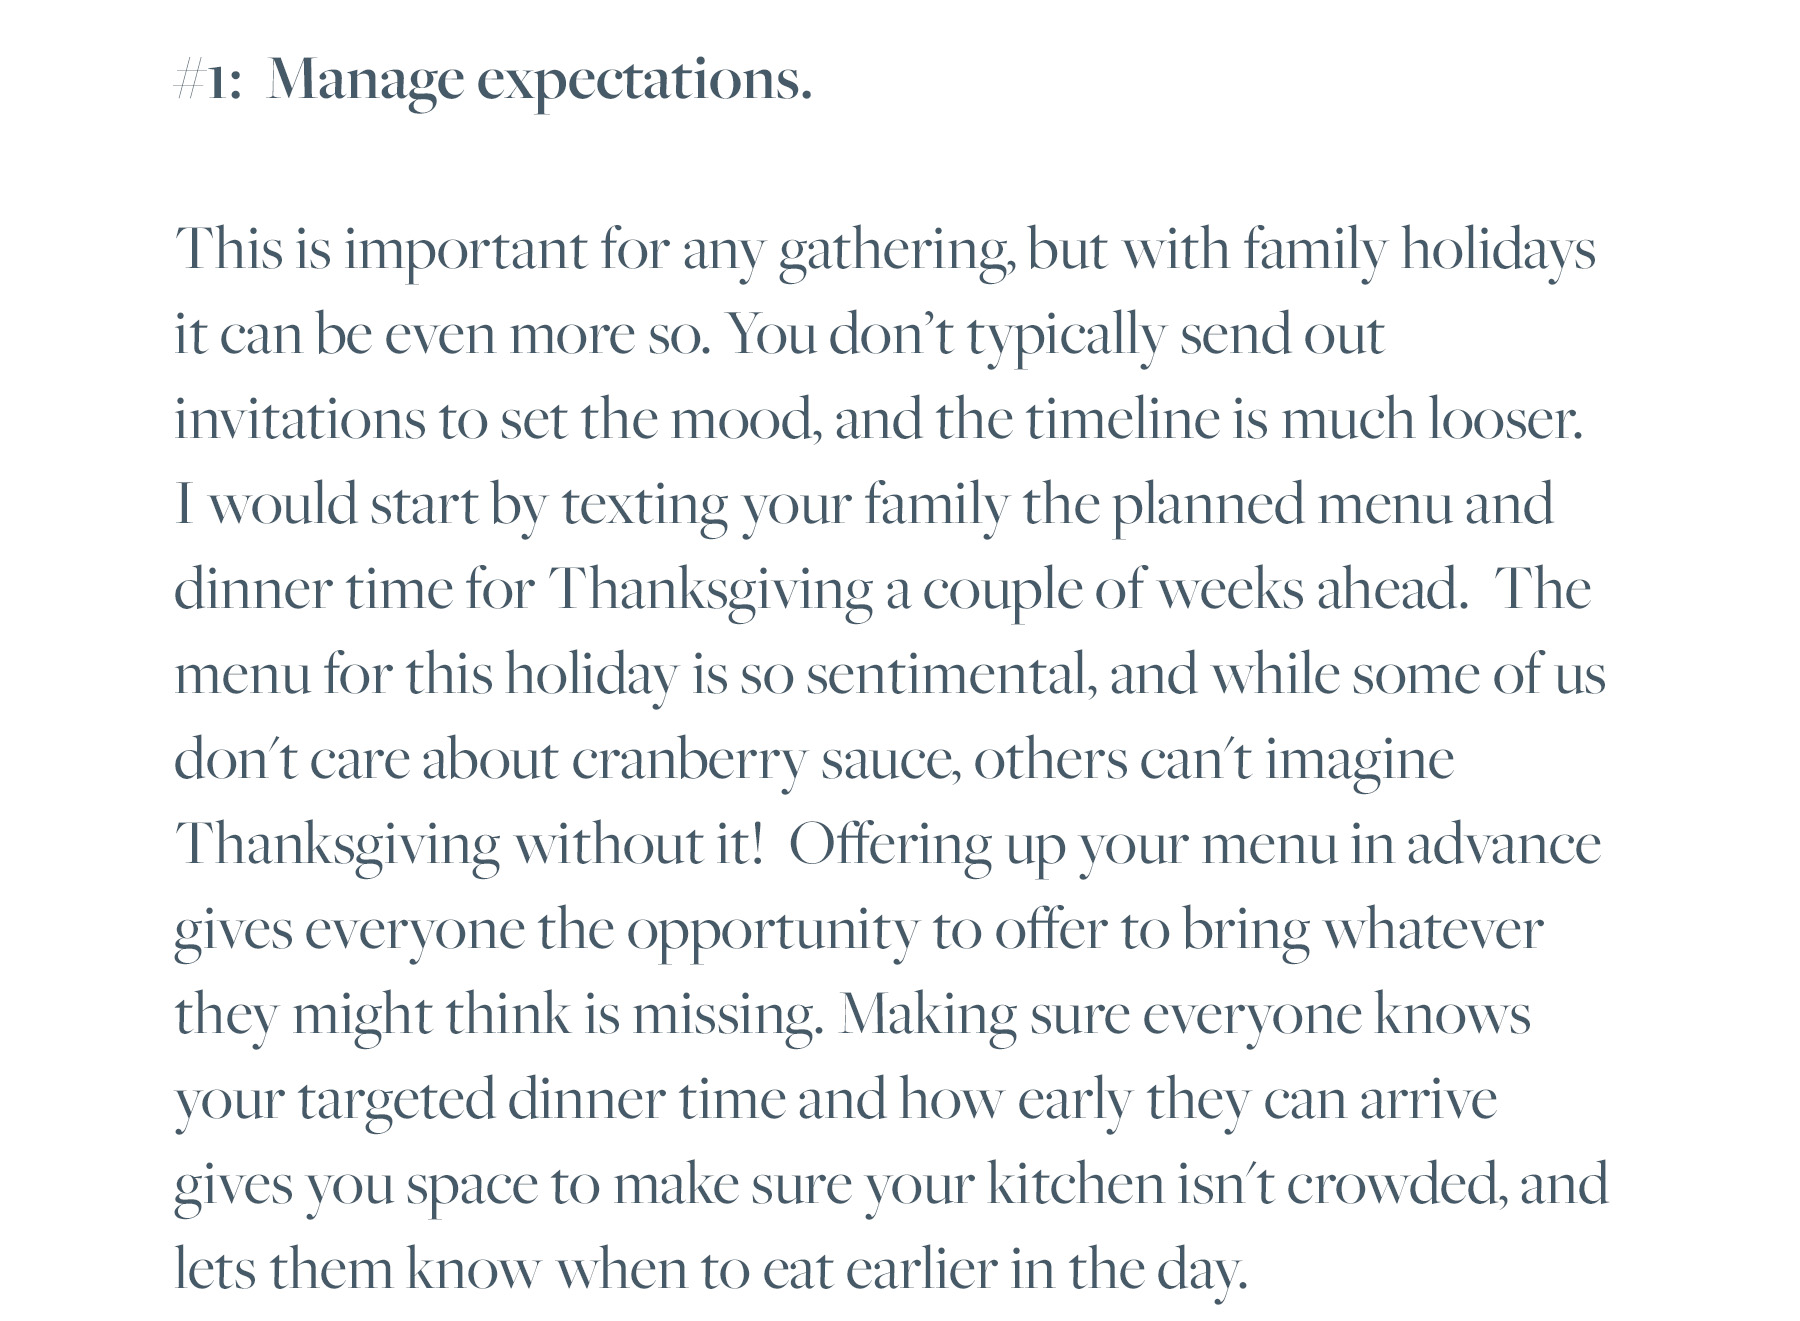 #1: Manage expectations. This is important for any gathering, but with family holidays it can be even more so. You don’t typically send out invitations to set the mood, and the timeline is much looser. I would start by texting your family the planned menu and dinner time for Thanksgiving a couple of weeks ahead. The menu for this holiday is so sentimental, and while some of us don't care about cranberry sauce, others can't imagine Thanksgiving without it! Offering up your menu in advance gives everyone the opportunity to offer to bring whatever they might think is missing. Making sure everyone knows your targeted dinner time and how early they can arrive gives you space to make sure your kitchen isn't crowded, and lets them know when to eat earlier in the day.